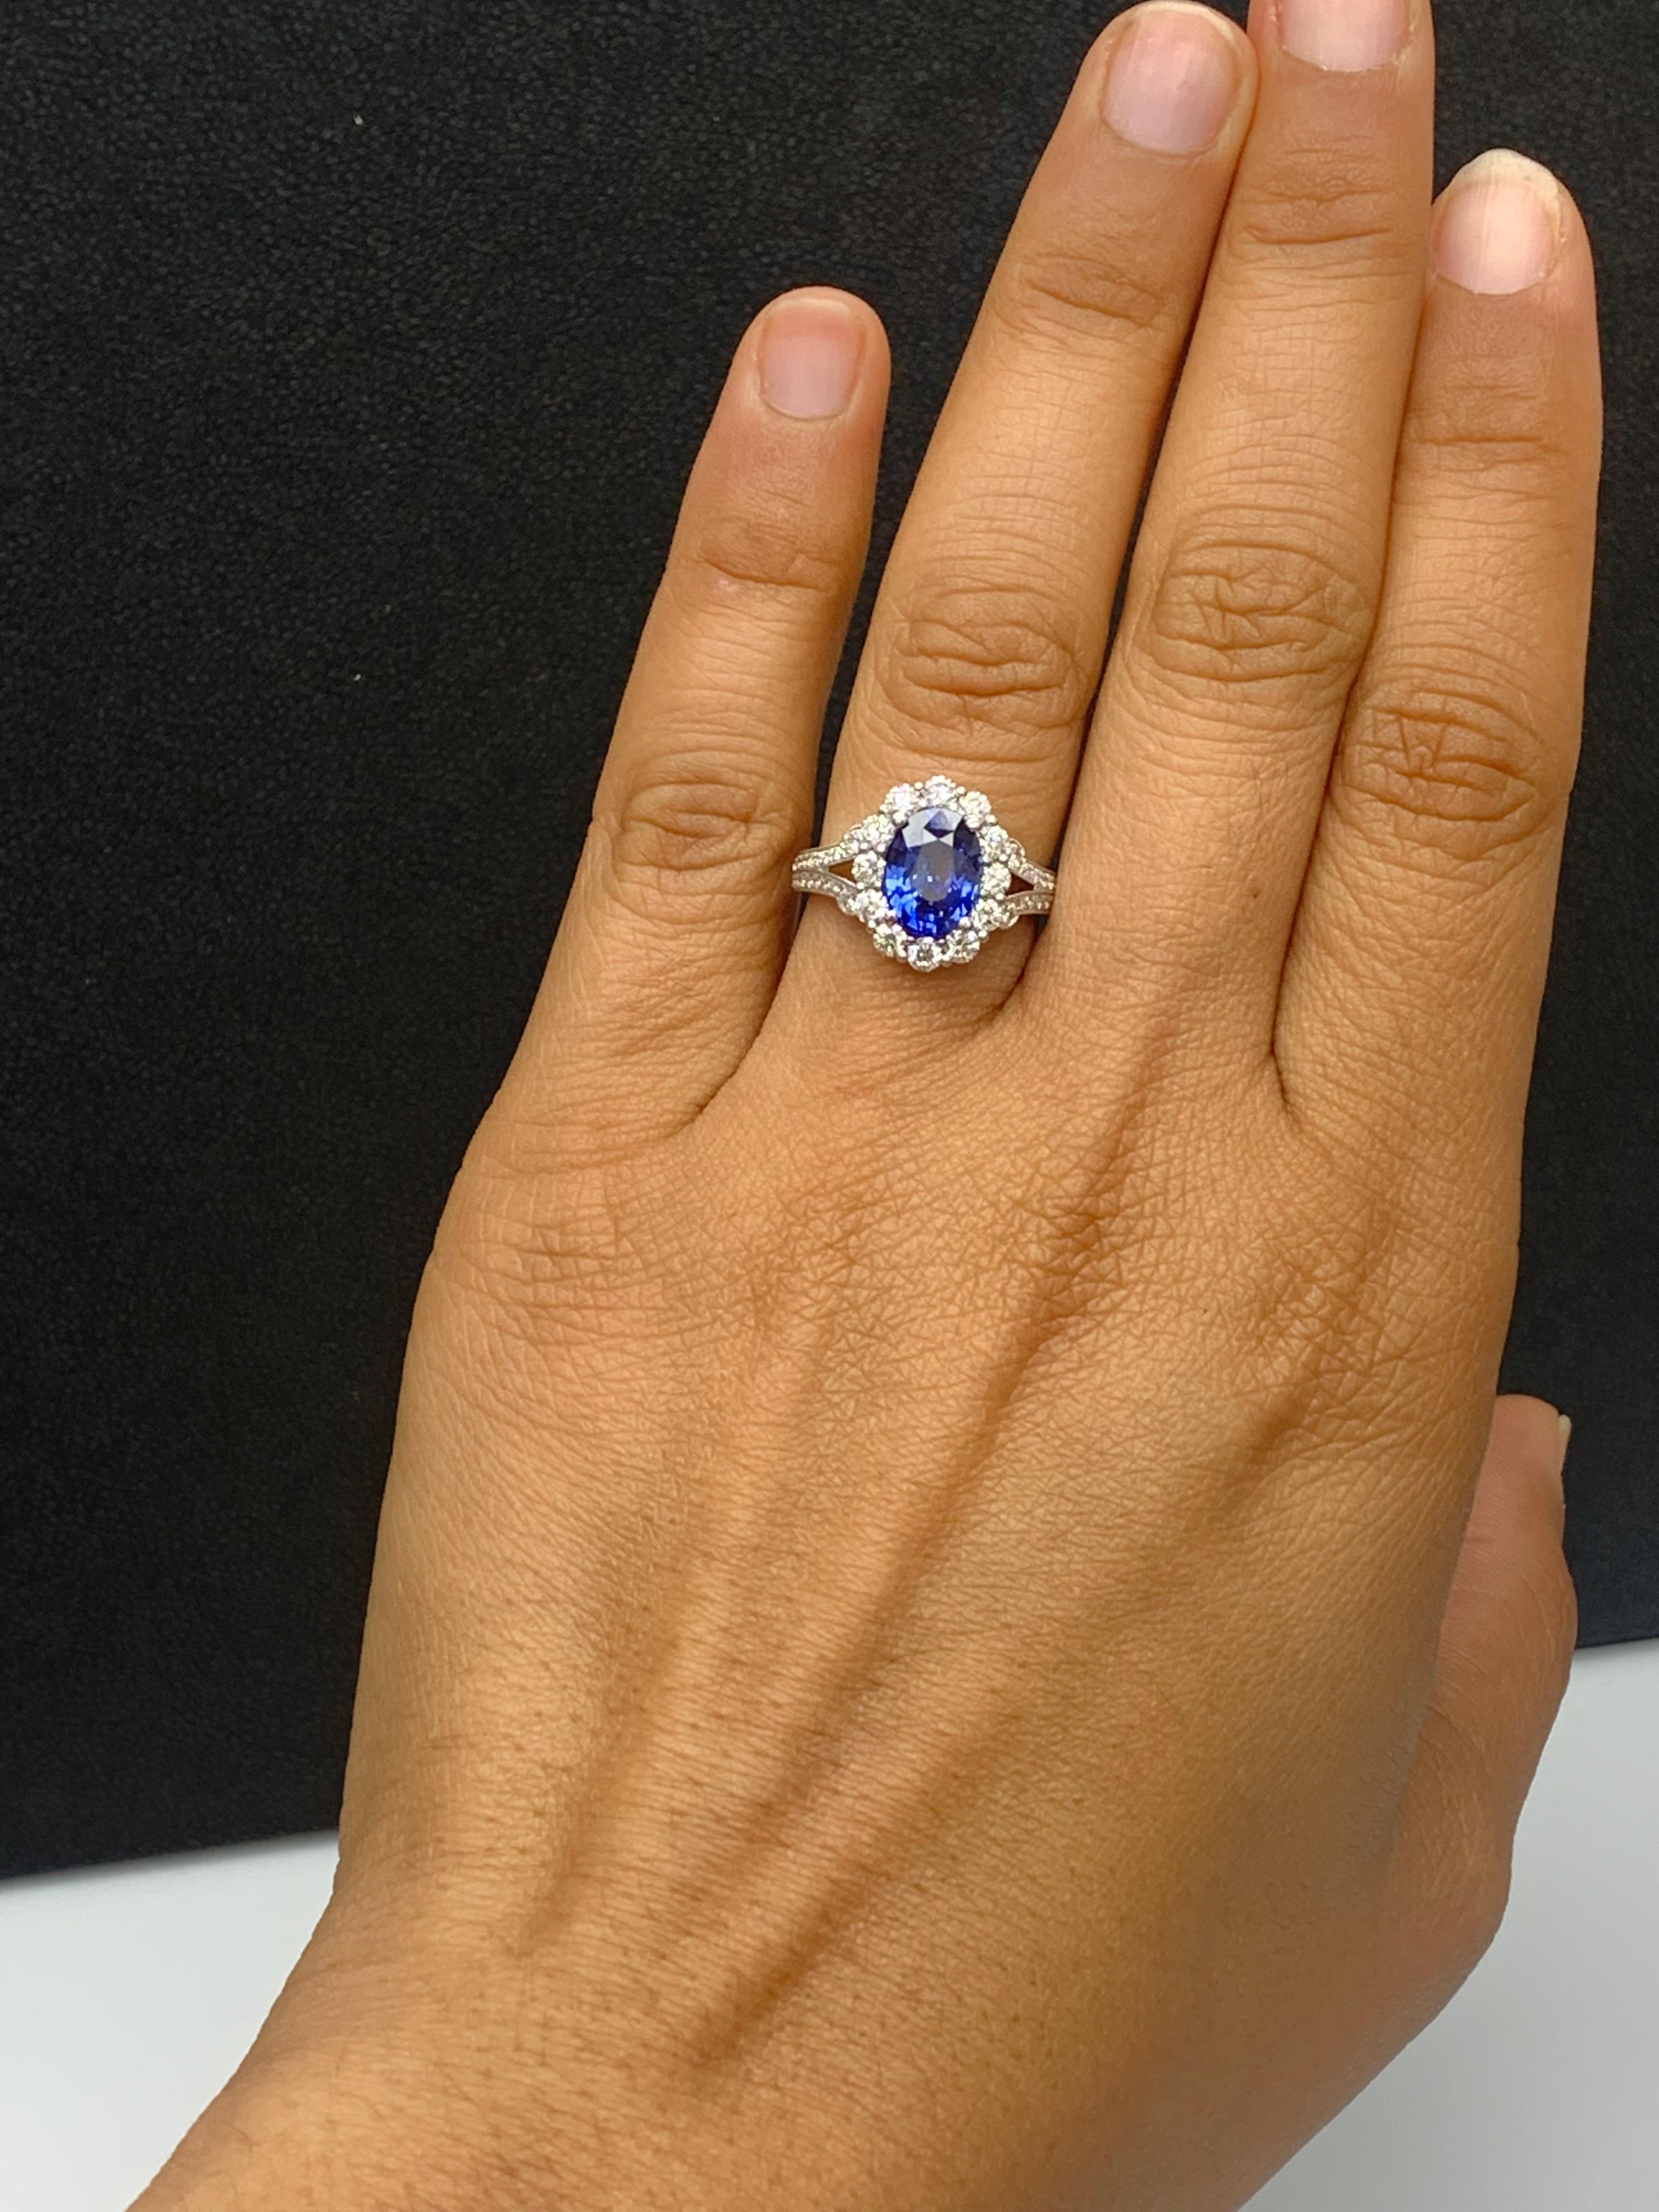 2.18 Carat Oval Cut Sapphire and Diamond Ring in 18k White Gold For Sale 2